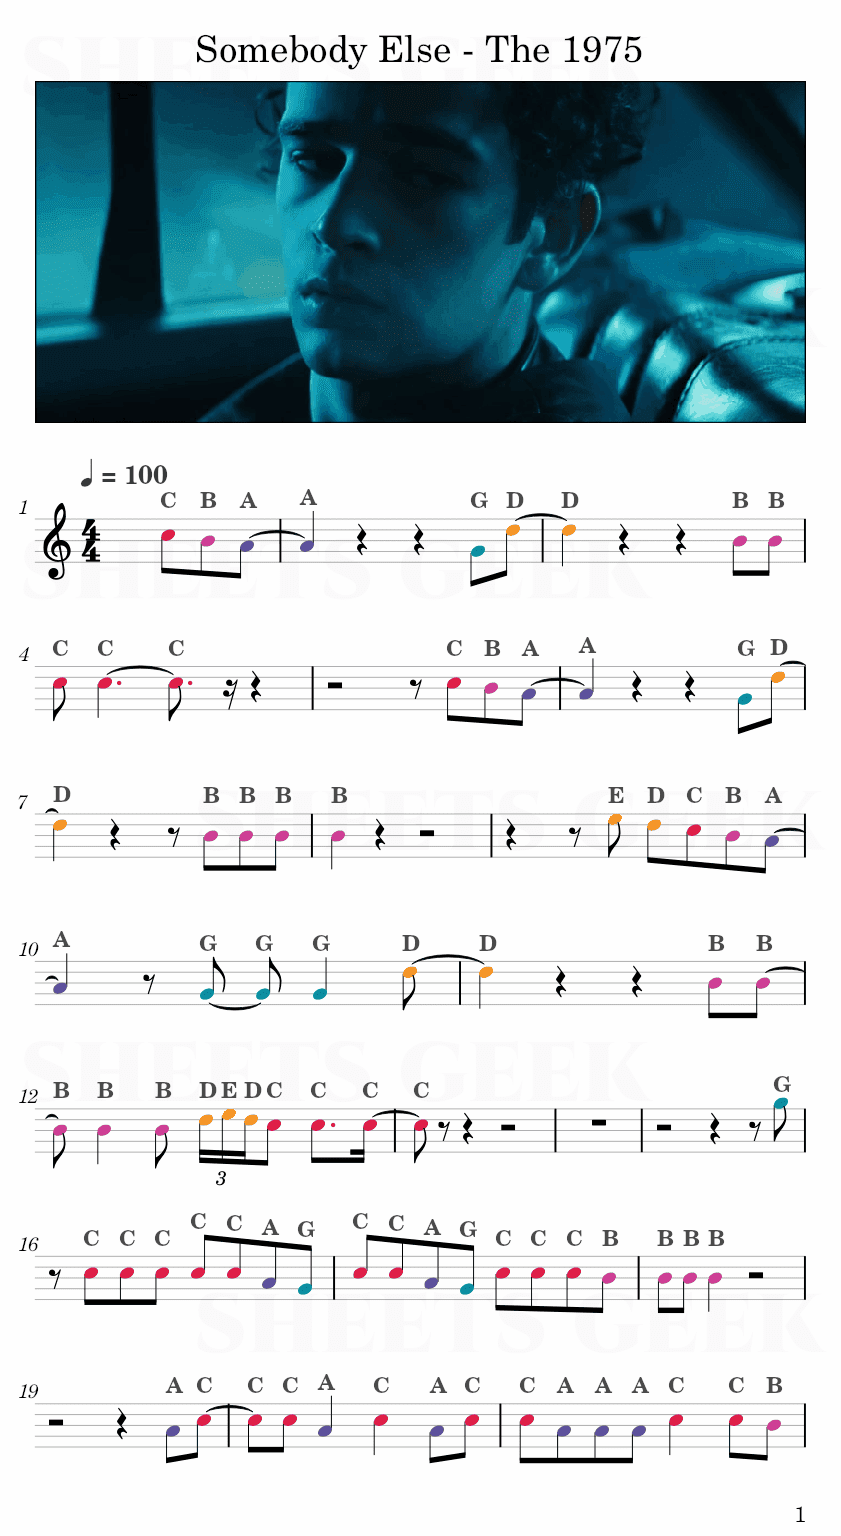 Somebody Else - The 1975 Easy Sheet Music Free for piano, keyboard, flute, violin, sax, cello page 1